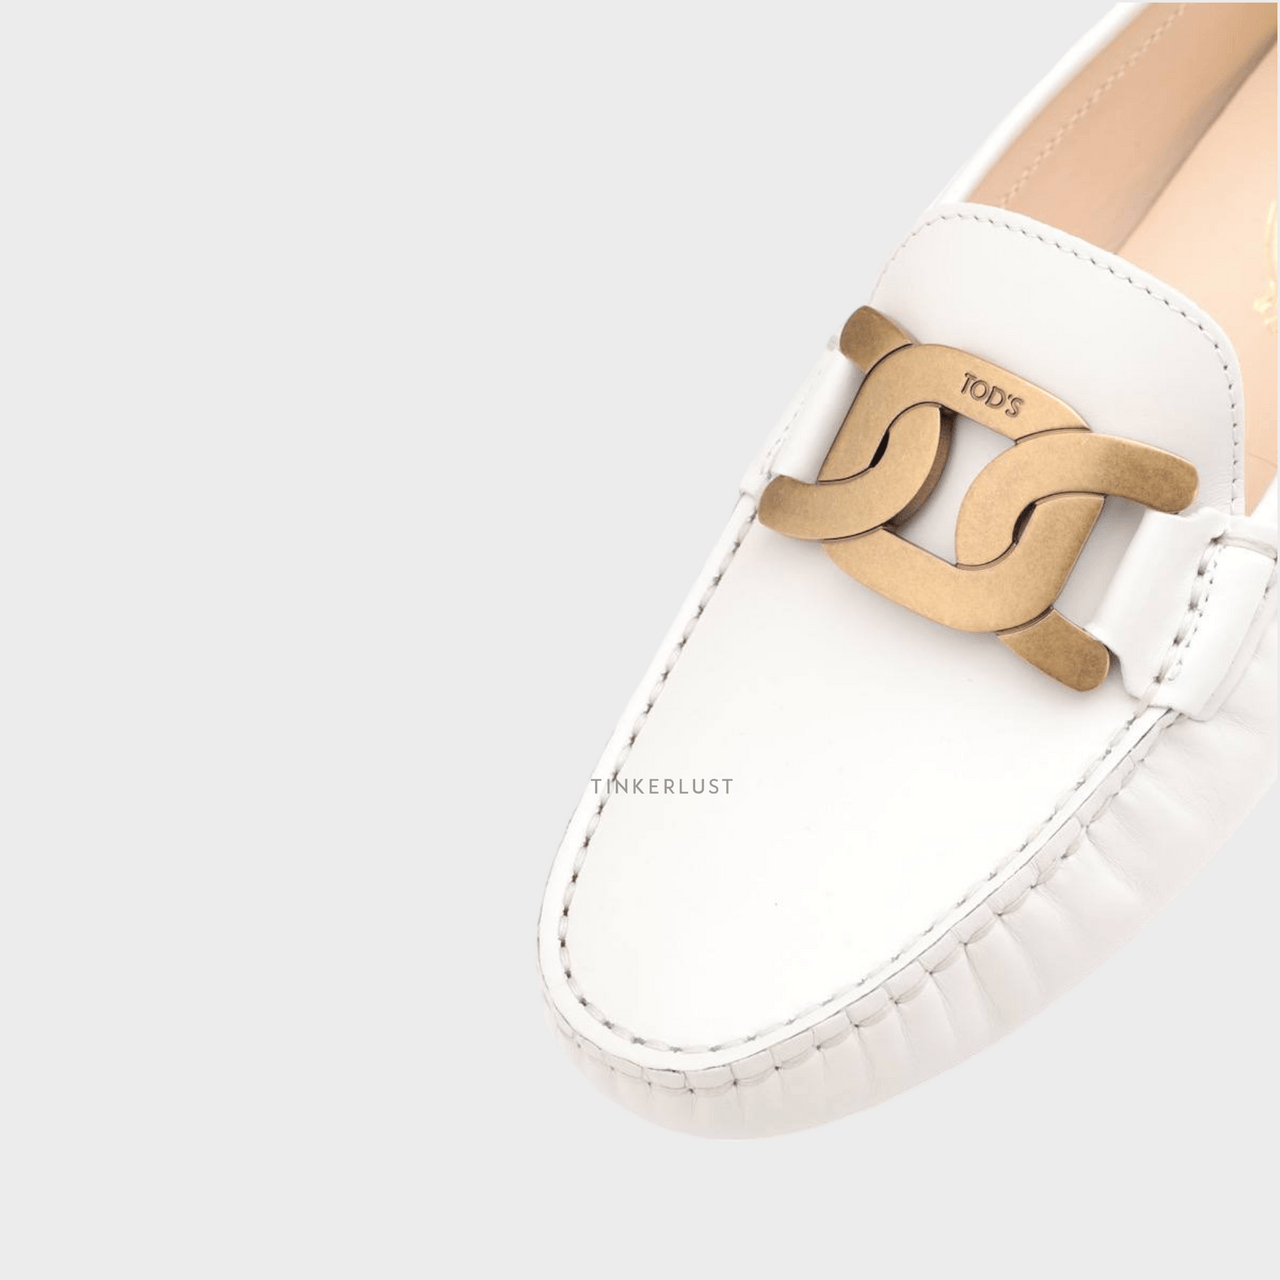 TOD'S Women Kate Gommino Driving Shoes in Off White Leather